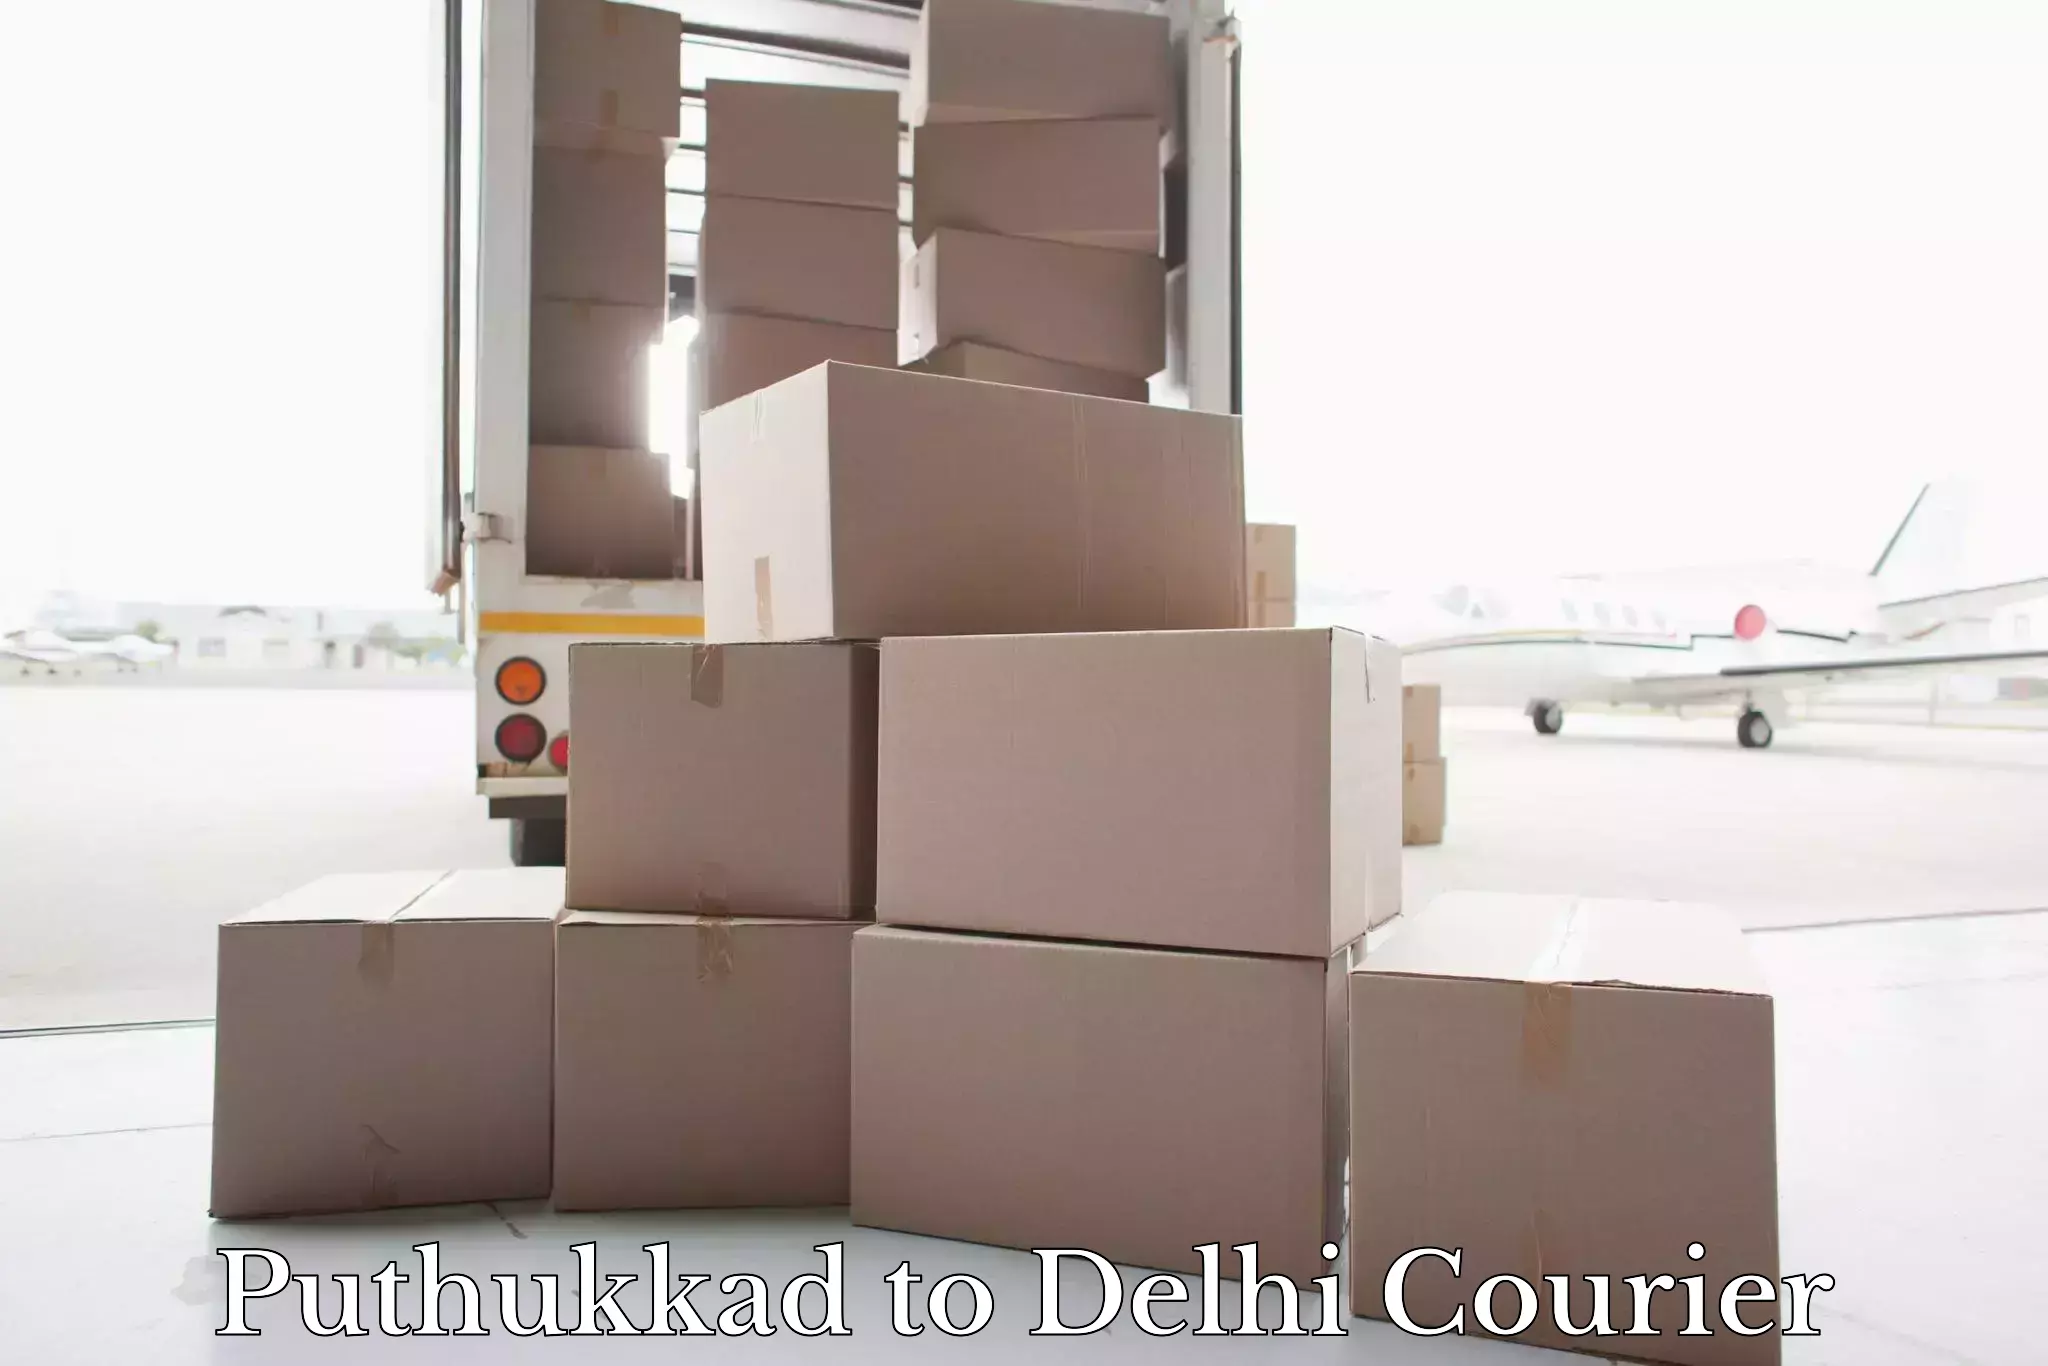 Luggage delivery providers Puthukkad to Delhi